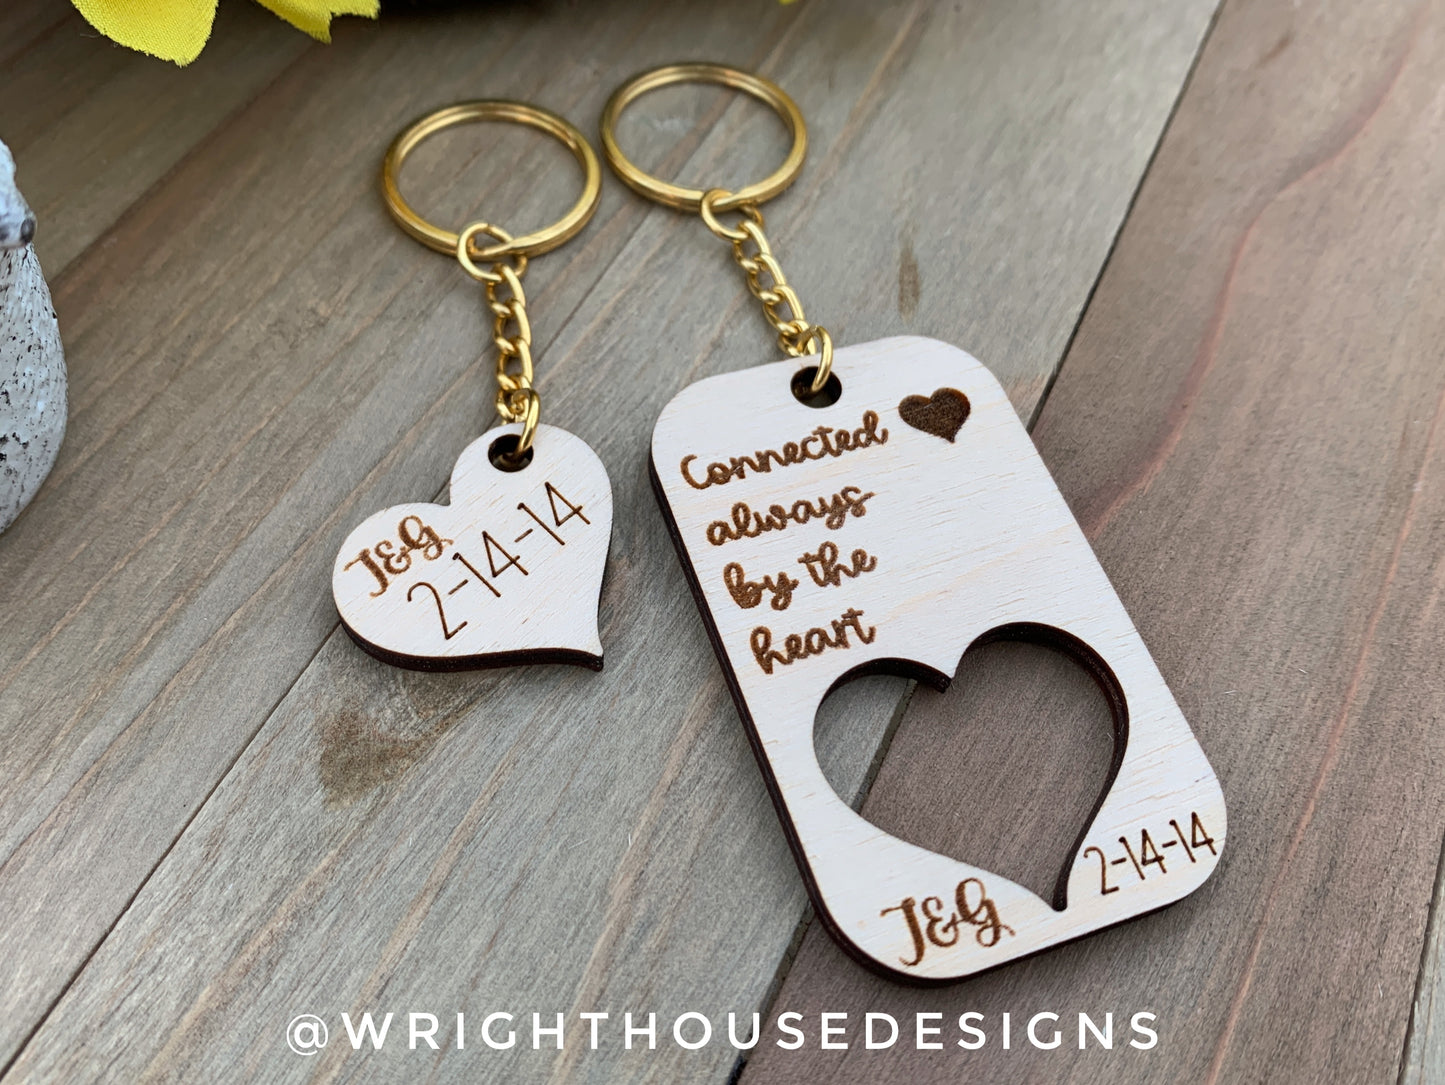 Connected Always By The Heart - Couples Interlocking Wooden Personalized Keychain